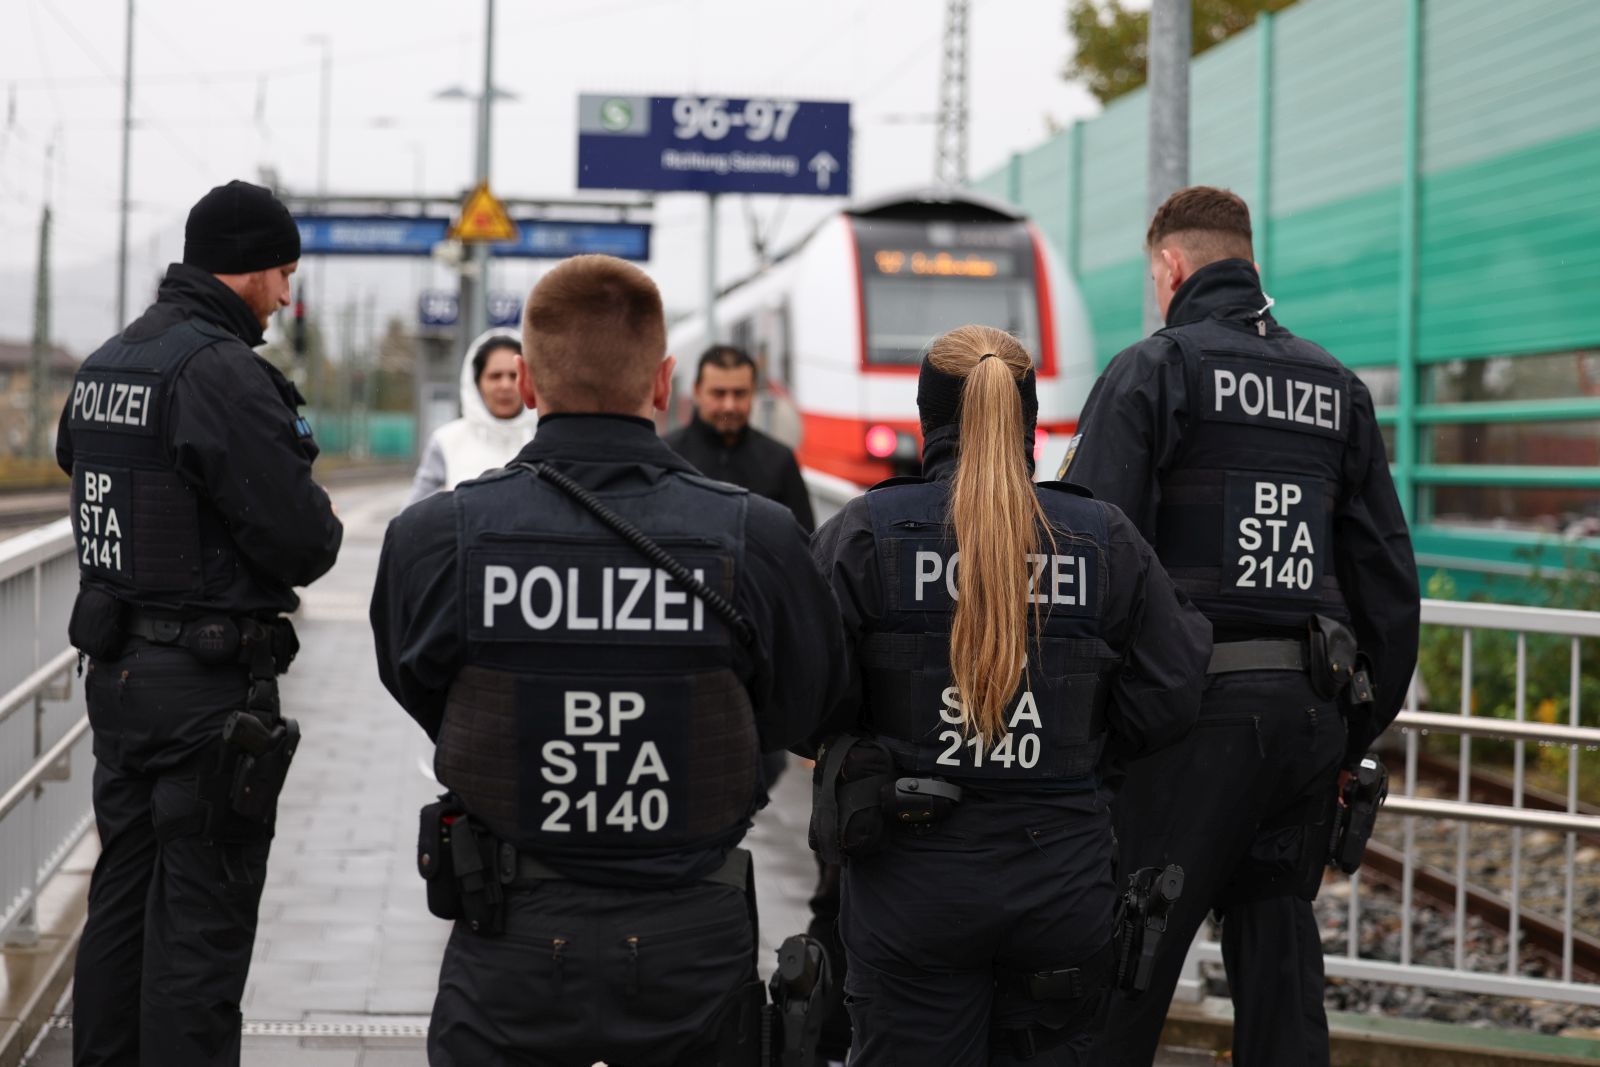 epa10935773 German police officers check passengers arriving by train from Austria at a border crossing point between Germany and Austria in Freilassing, Germany, 24 October 2023. Austria and Germany have introduced temporary border controls to stem irregular migration. German Federal Police has apprehended 1,550 smuggling operations and around 1,700 smugglers across Germany so far this year, and has detected around 98,000 unauthorised entries into Germany, the federal interior ministry said. According to the authorities, smugglers repeatedly put refugees' lives danger during smuggling operations, for example during unsecured transport on loading platforms or in airtight lorries. On 13 October, seven people were killed, including a six-year-old child, in a serious traffic accident involving an overcrowded smuggling vehicle on the A94 motorway in Bavaria.  EPA/Anna Szilagyi